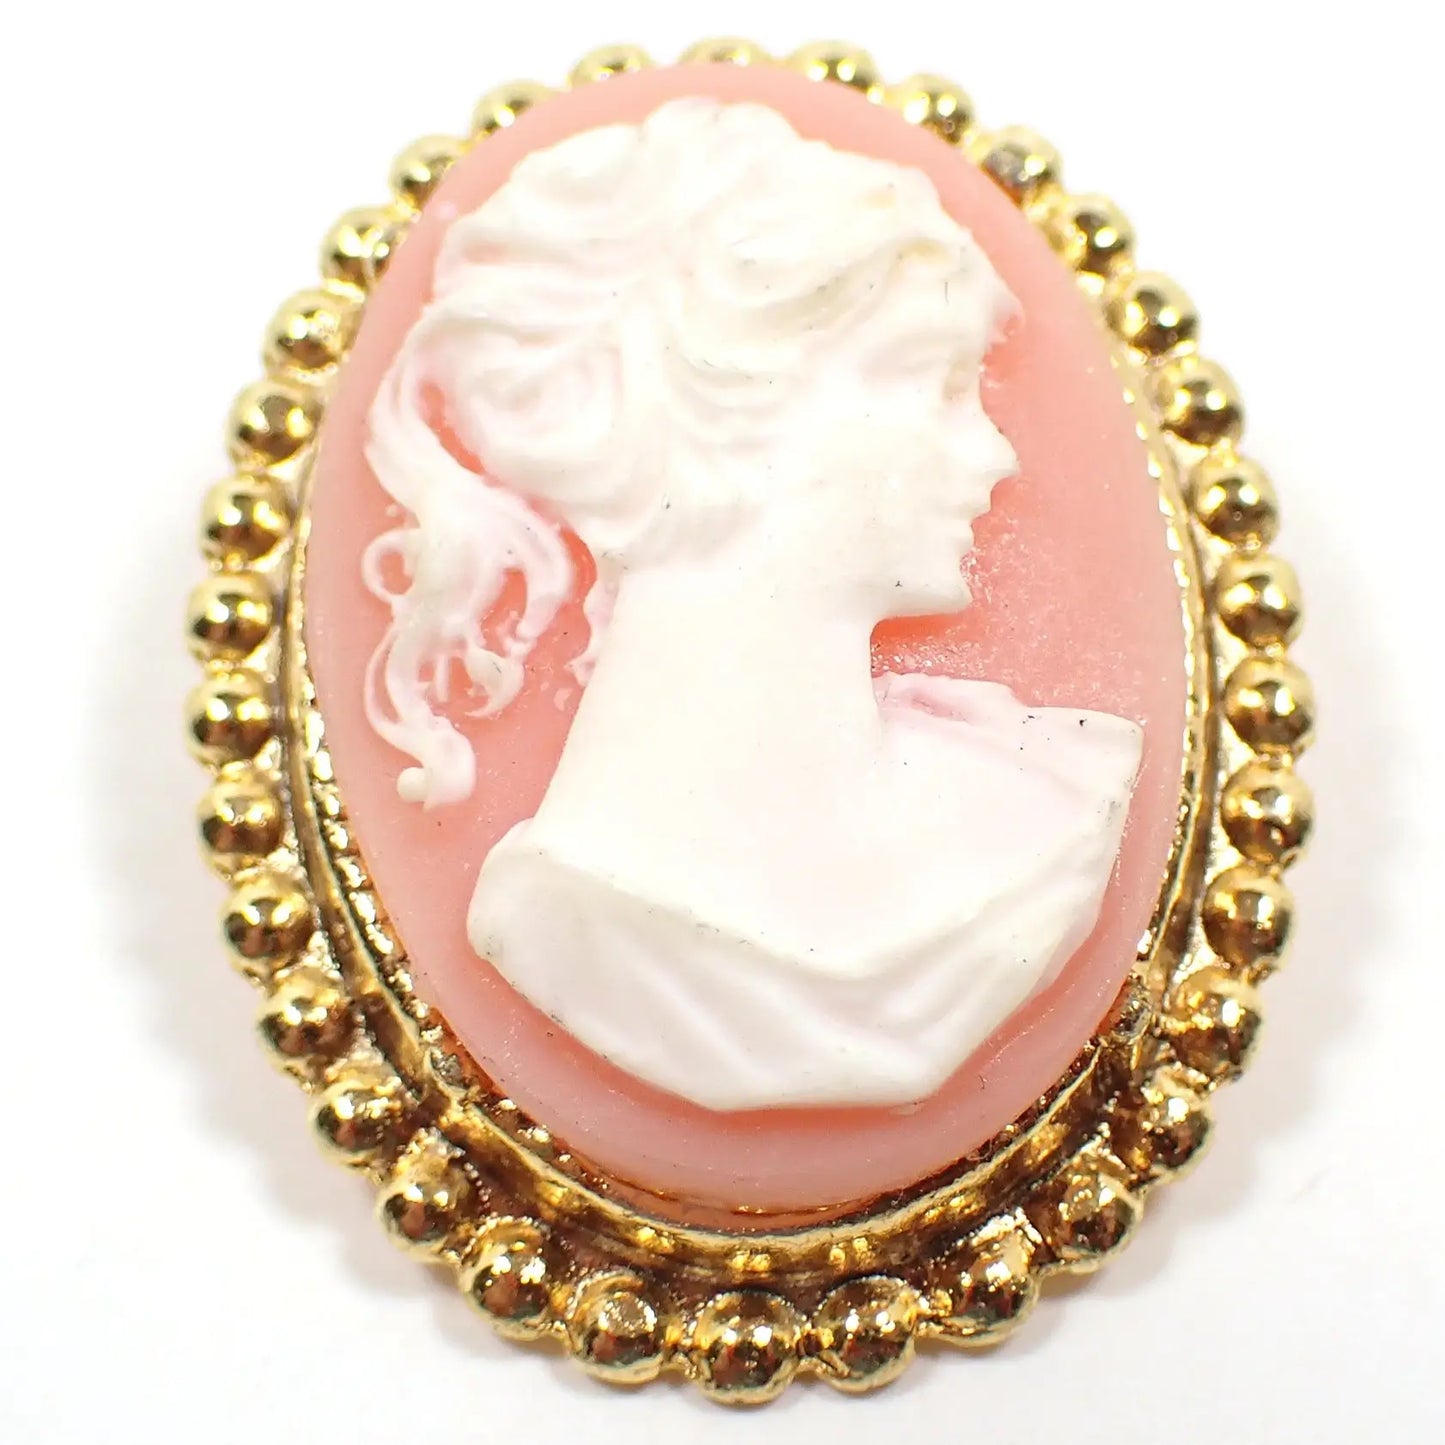 Enlarged front view of the retro vintage girl cameo brooch pin. The metal is gold tone in color. It is oval shaped with a dotted edge. There is a bust of a girl with a pony tail on the front with a light pink background.